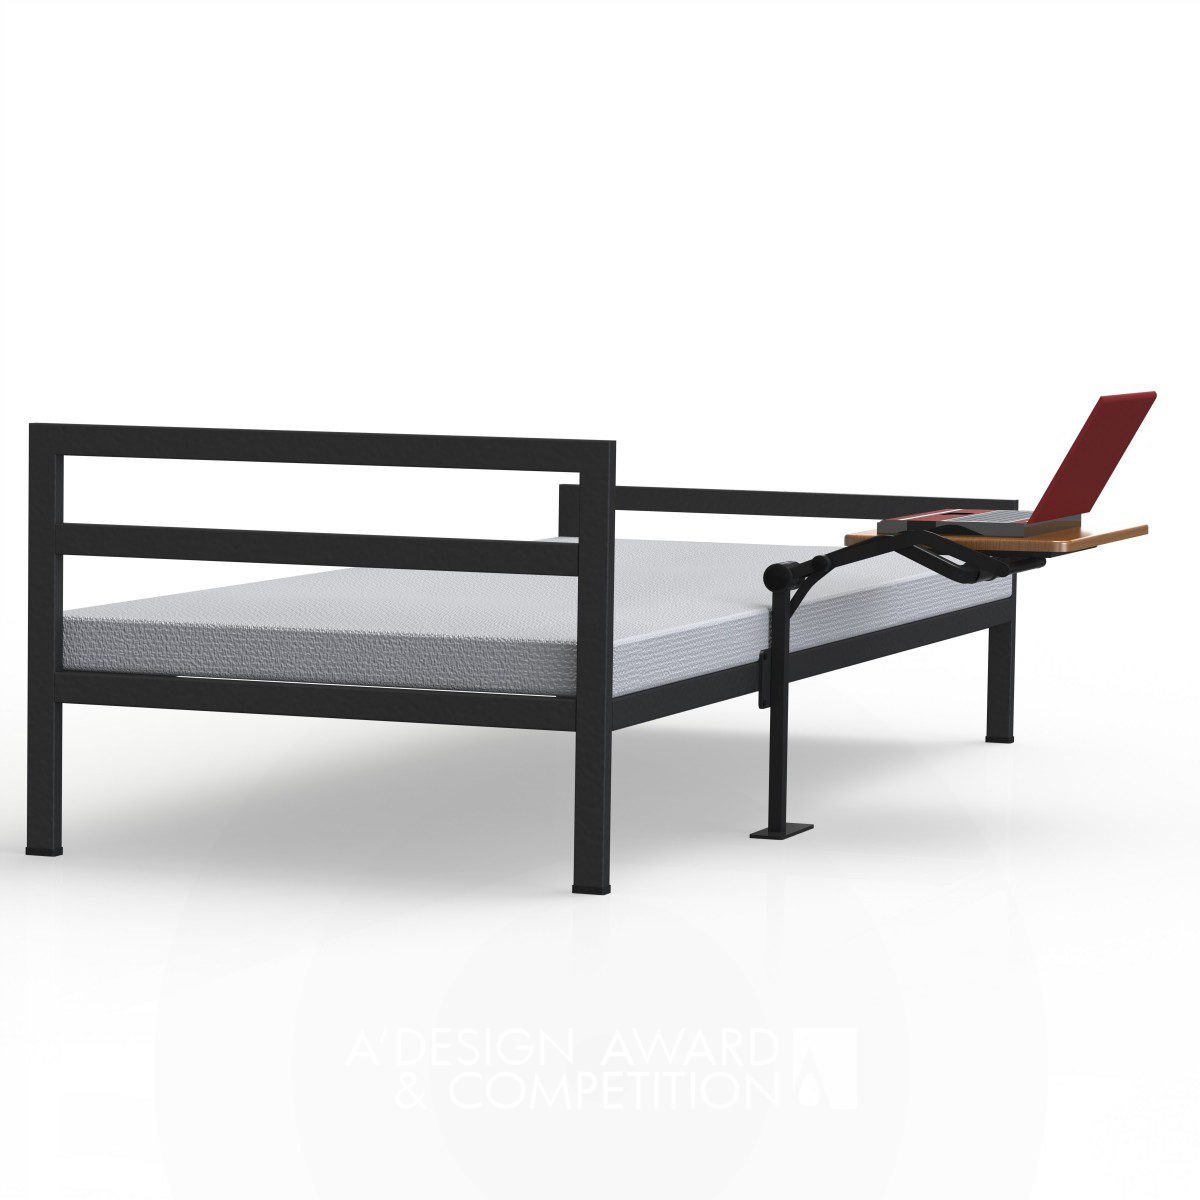 Ergo-table for bed Attachable Swing-away table by Ivan Paul B. Abanilla